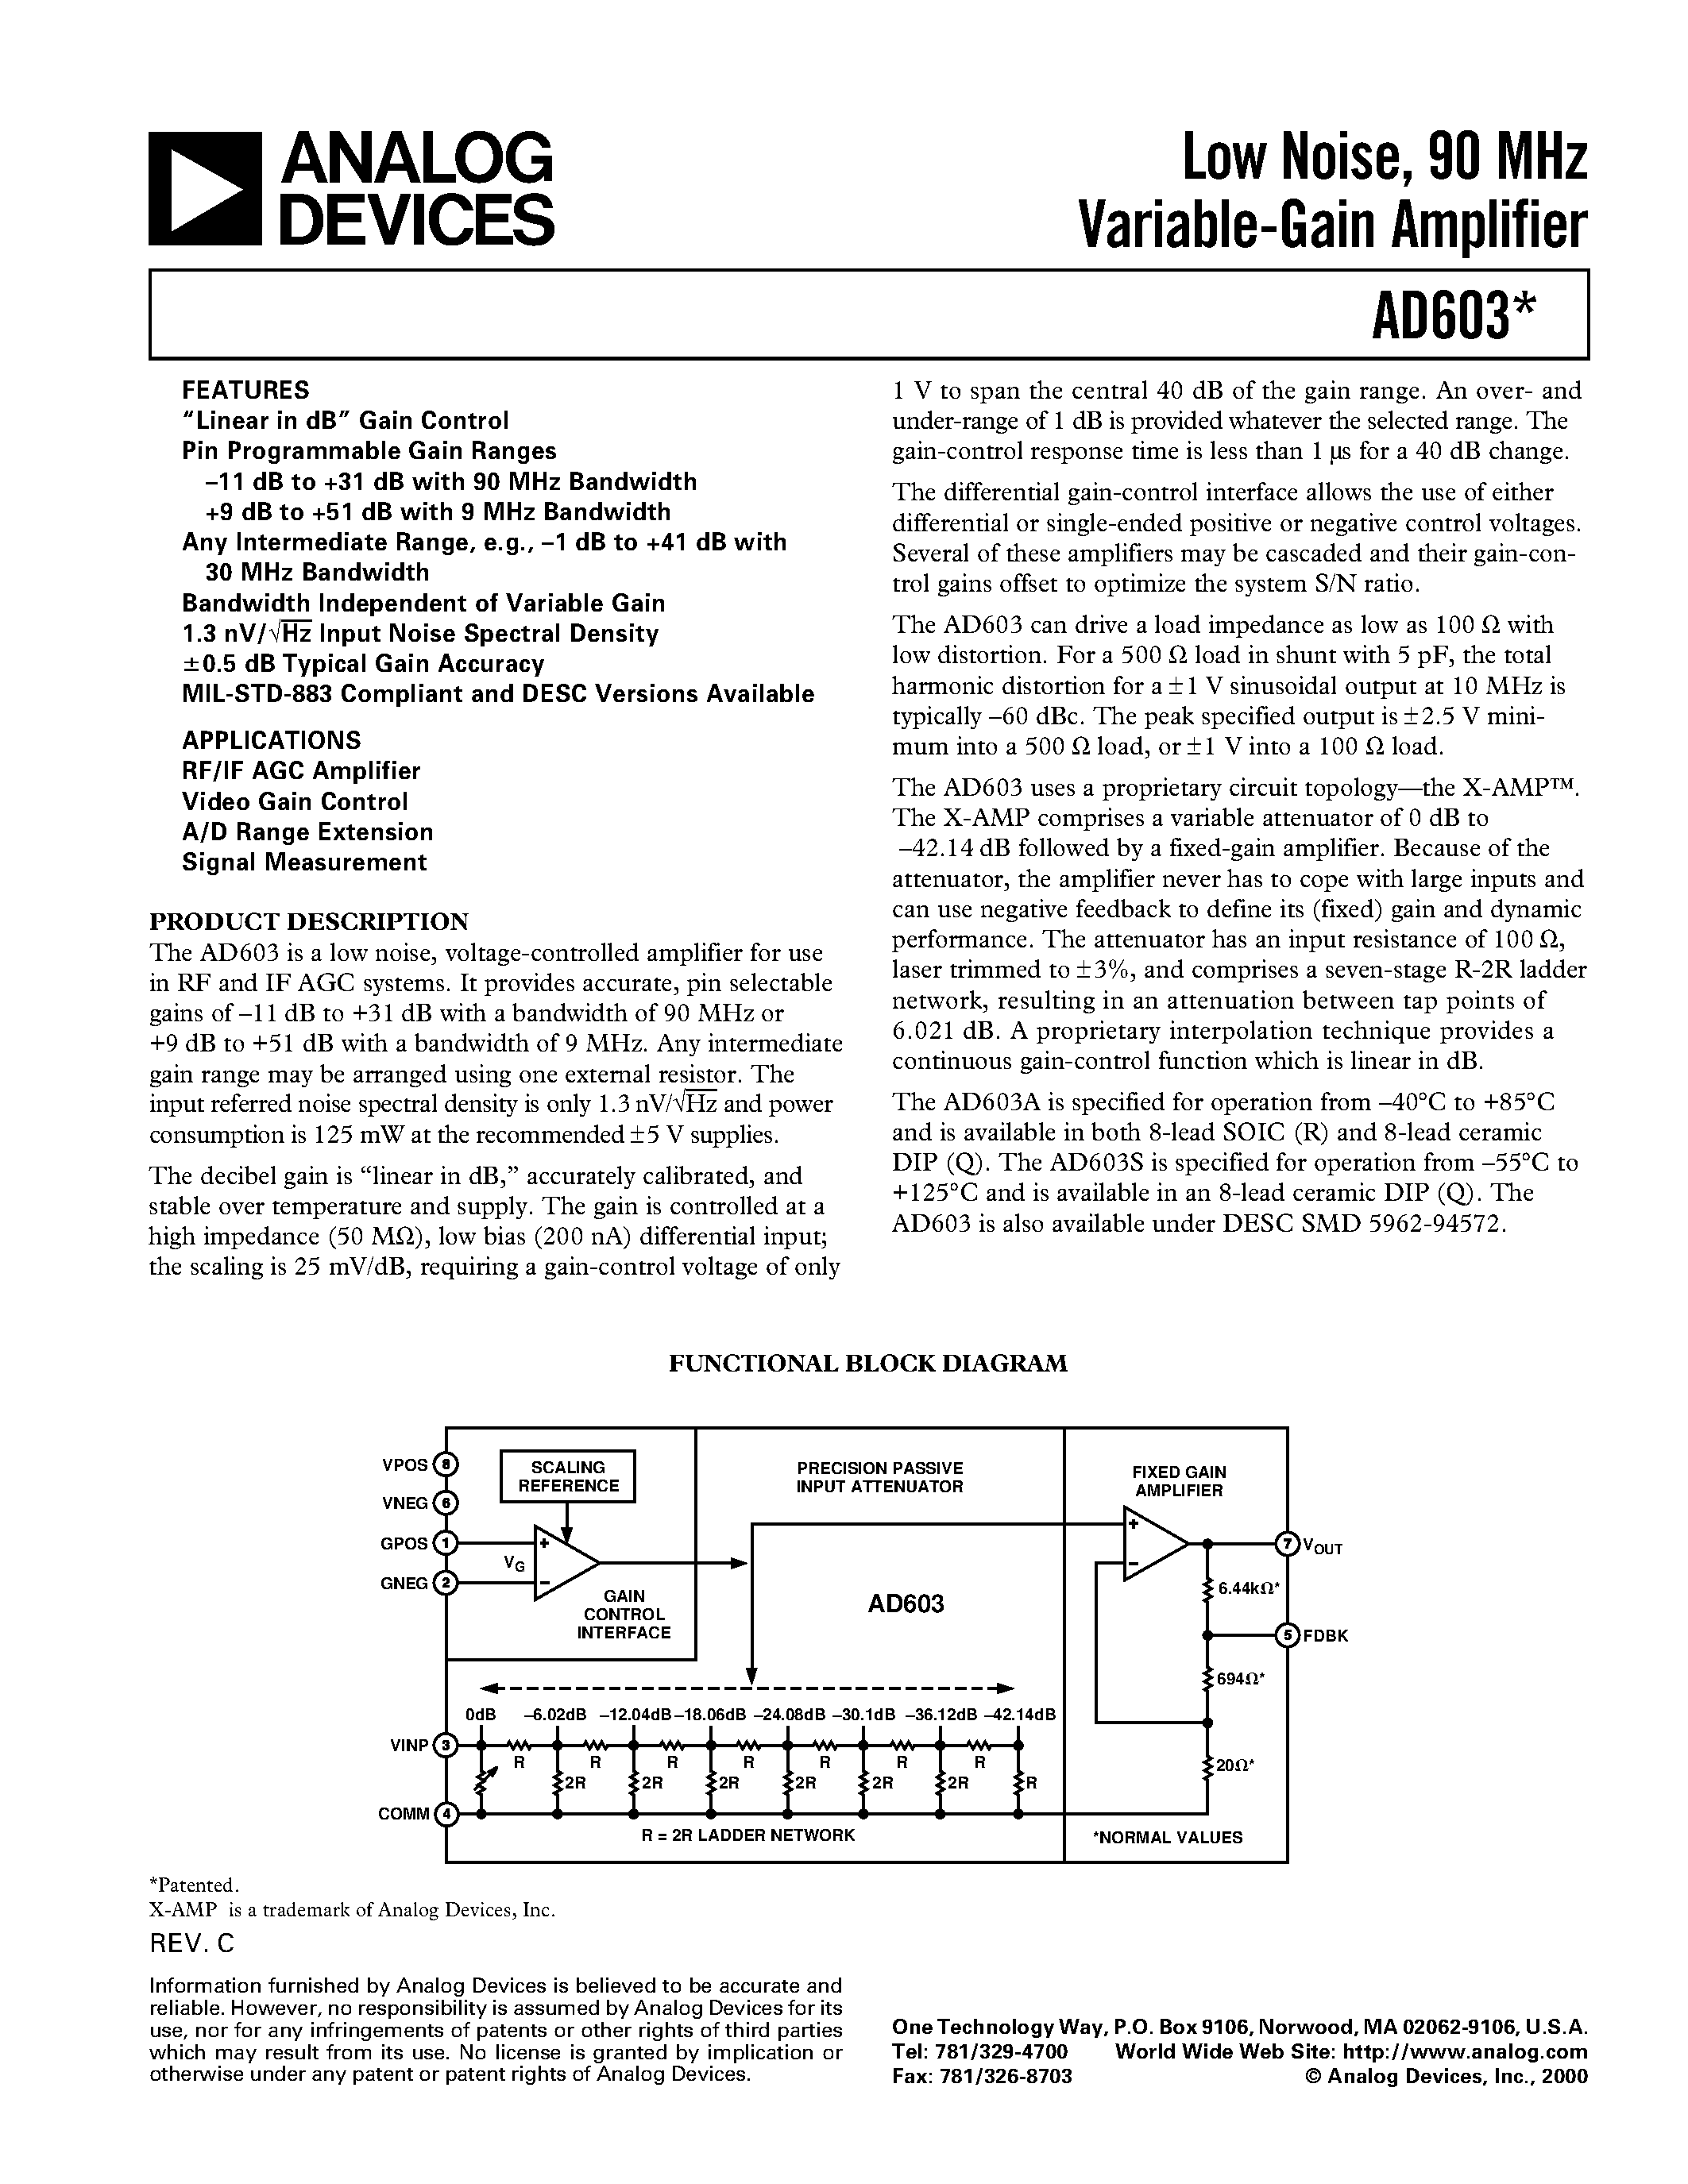 Datasheet AD603ACHIPS - Low Noise/ 90 MHz Variable-Gain Amplifier page 1